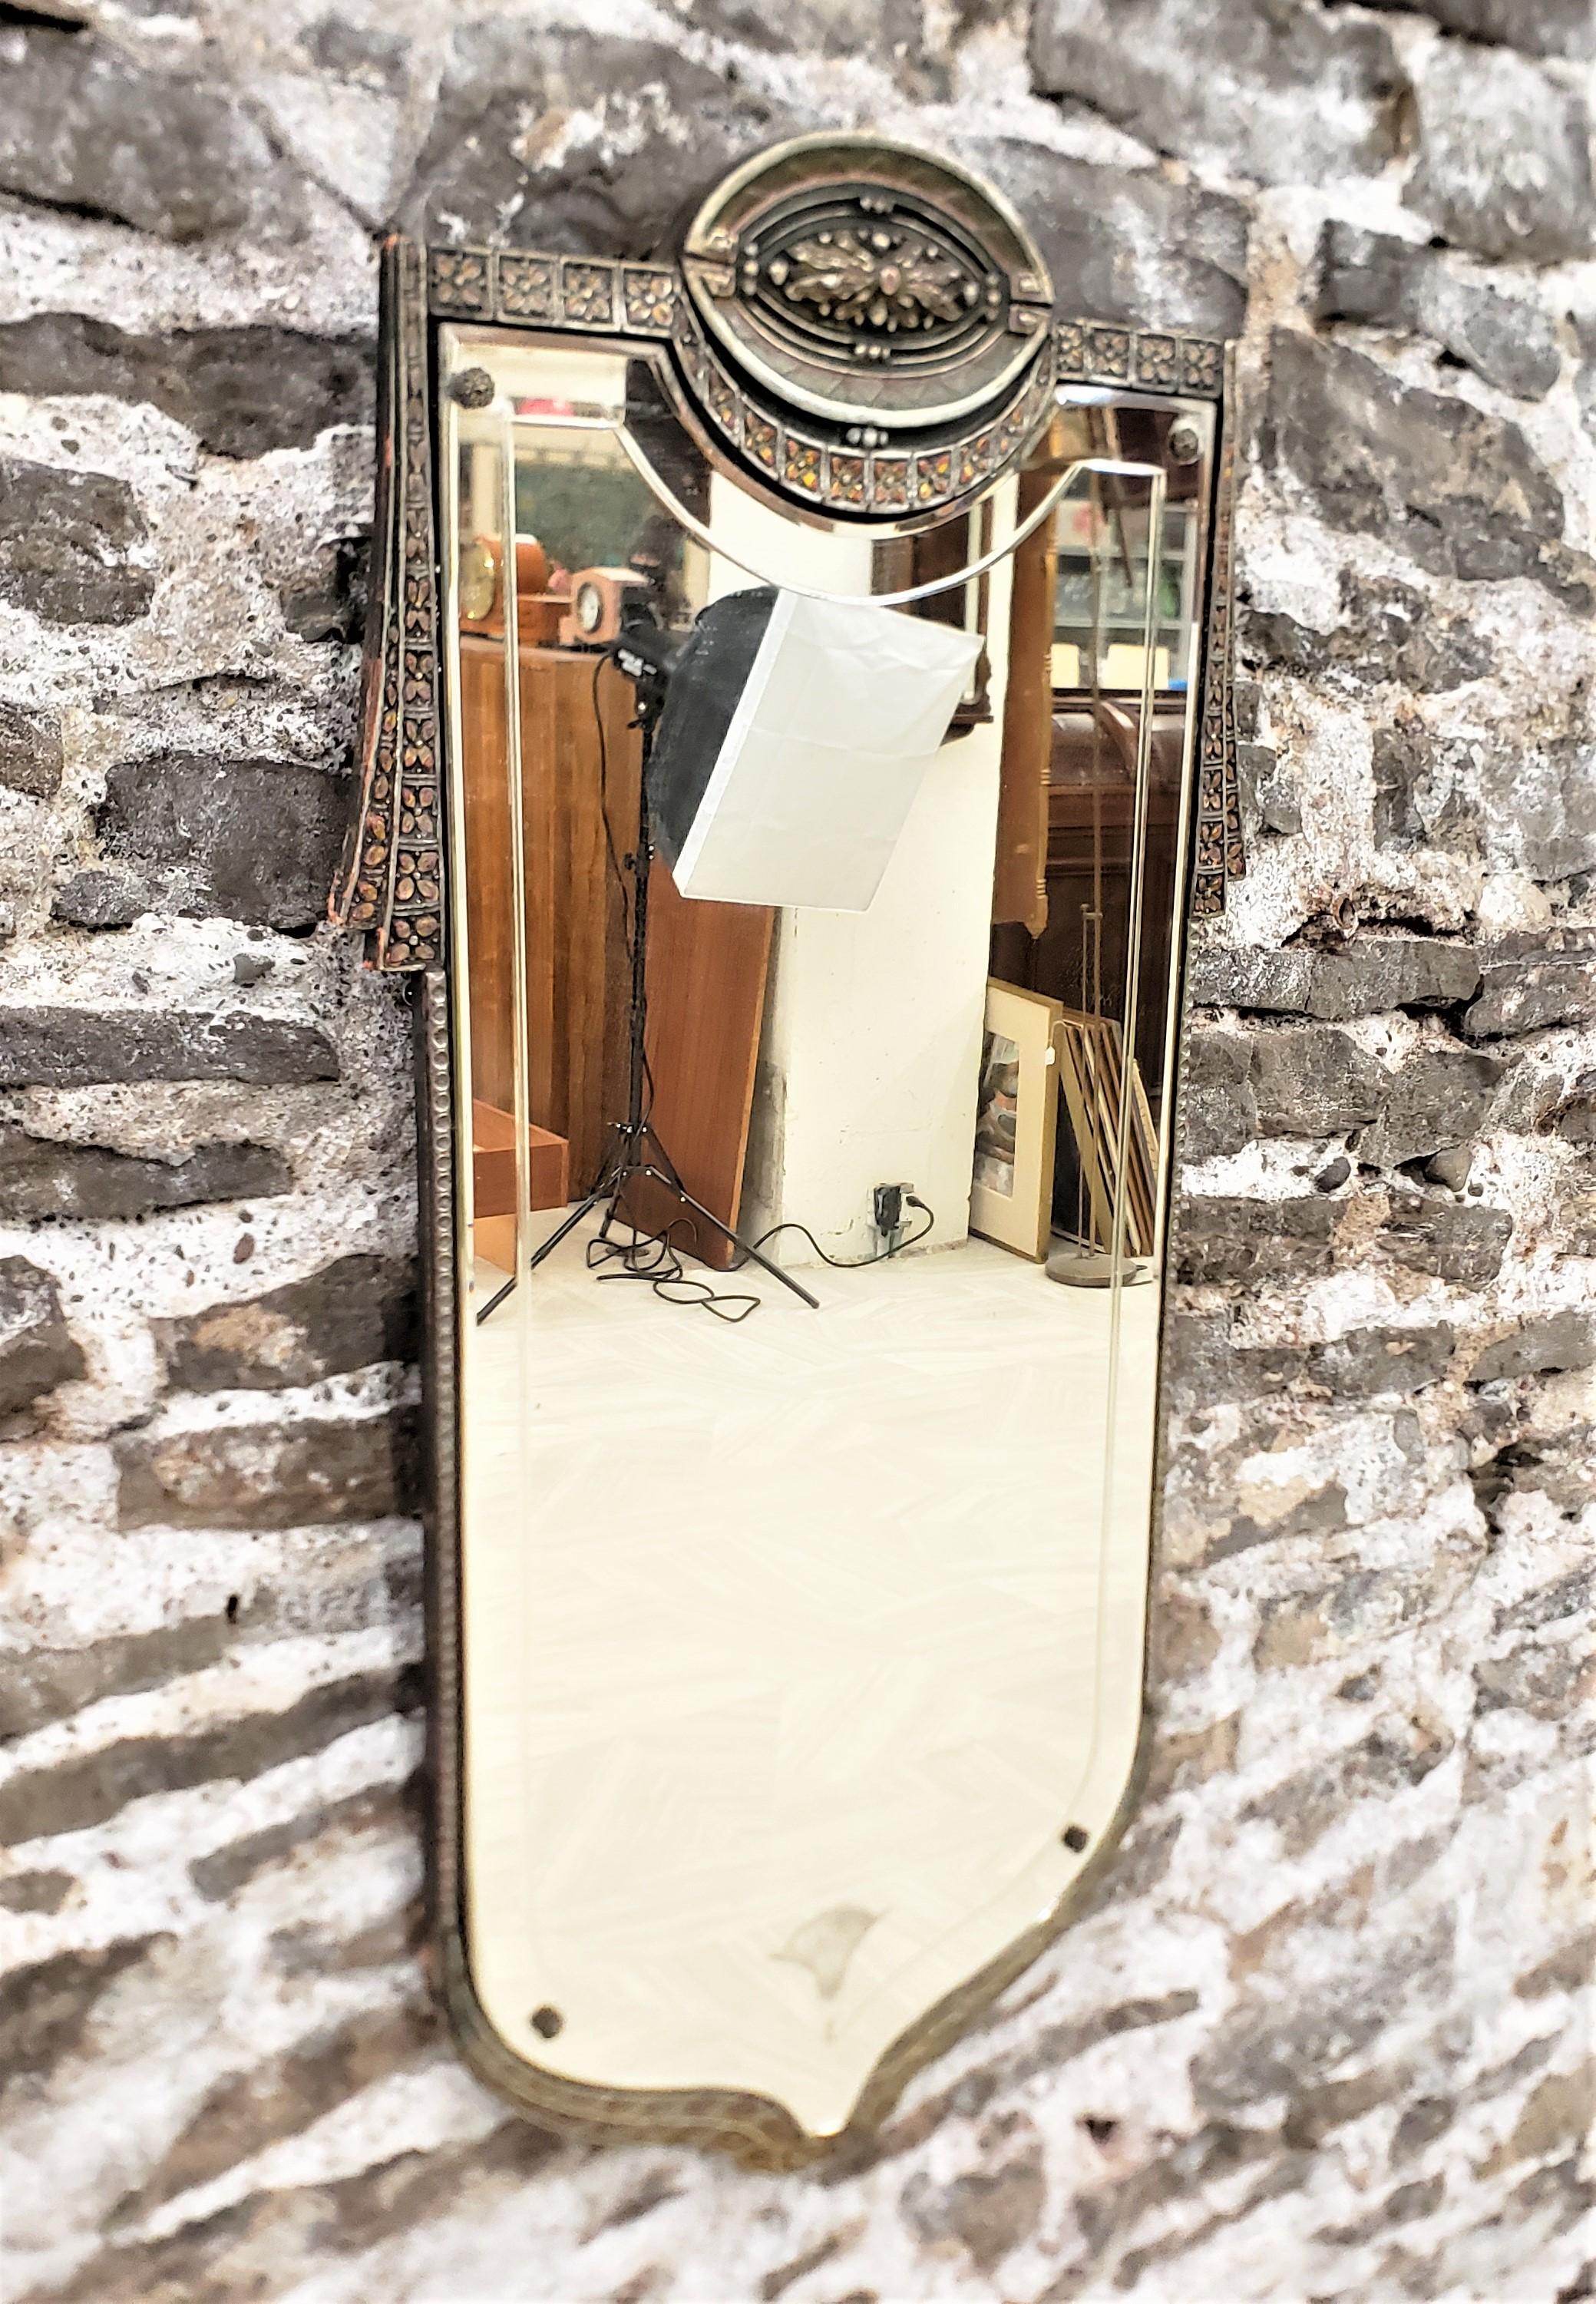 This antique wall mirror was made in the United States by an unknown maker, and dates to approximately 1920 and done in a period Art Deco style. The mirror is shield shaped with a beveled edge and an etched border and stylized fan at the bottom. The